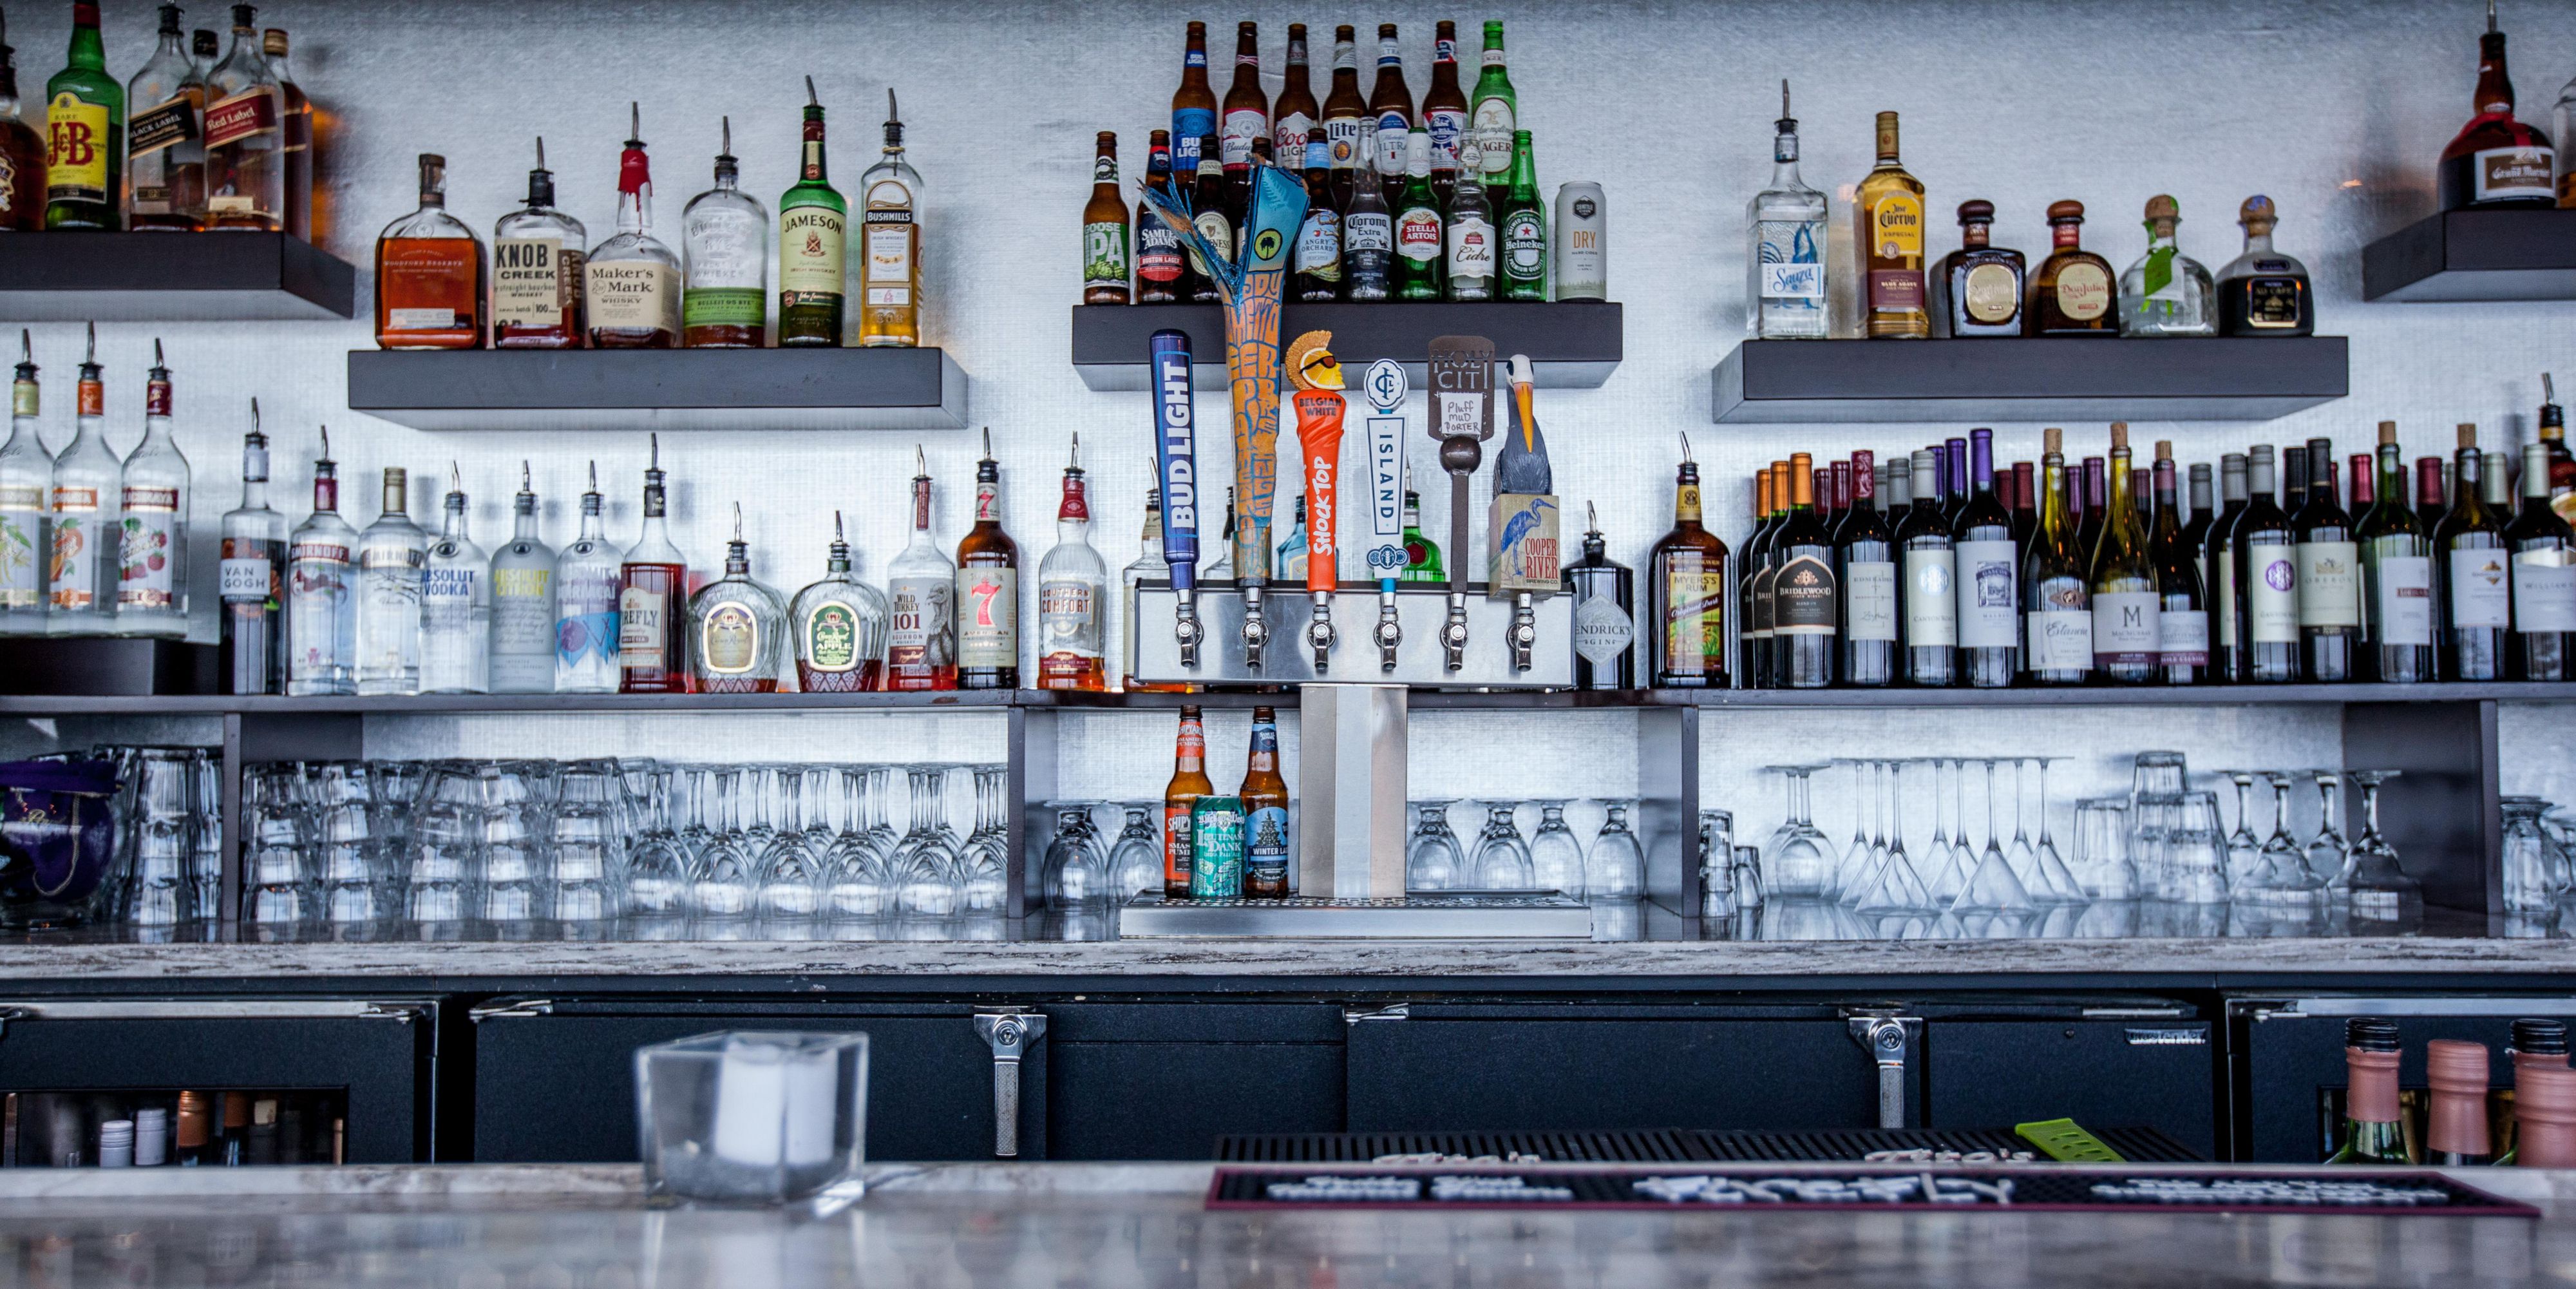 Enjoy craft beers and cocktail mixes at Harborview Lounge!